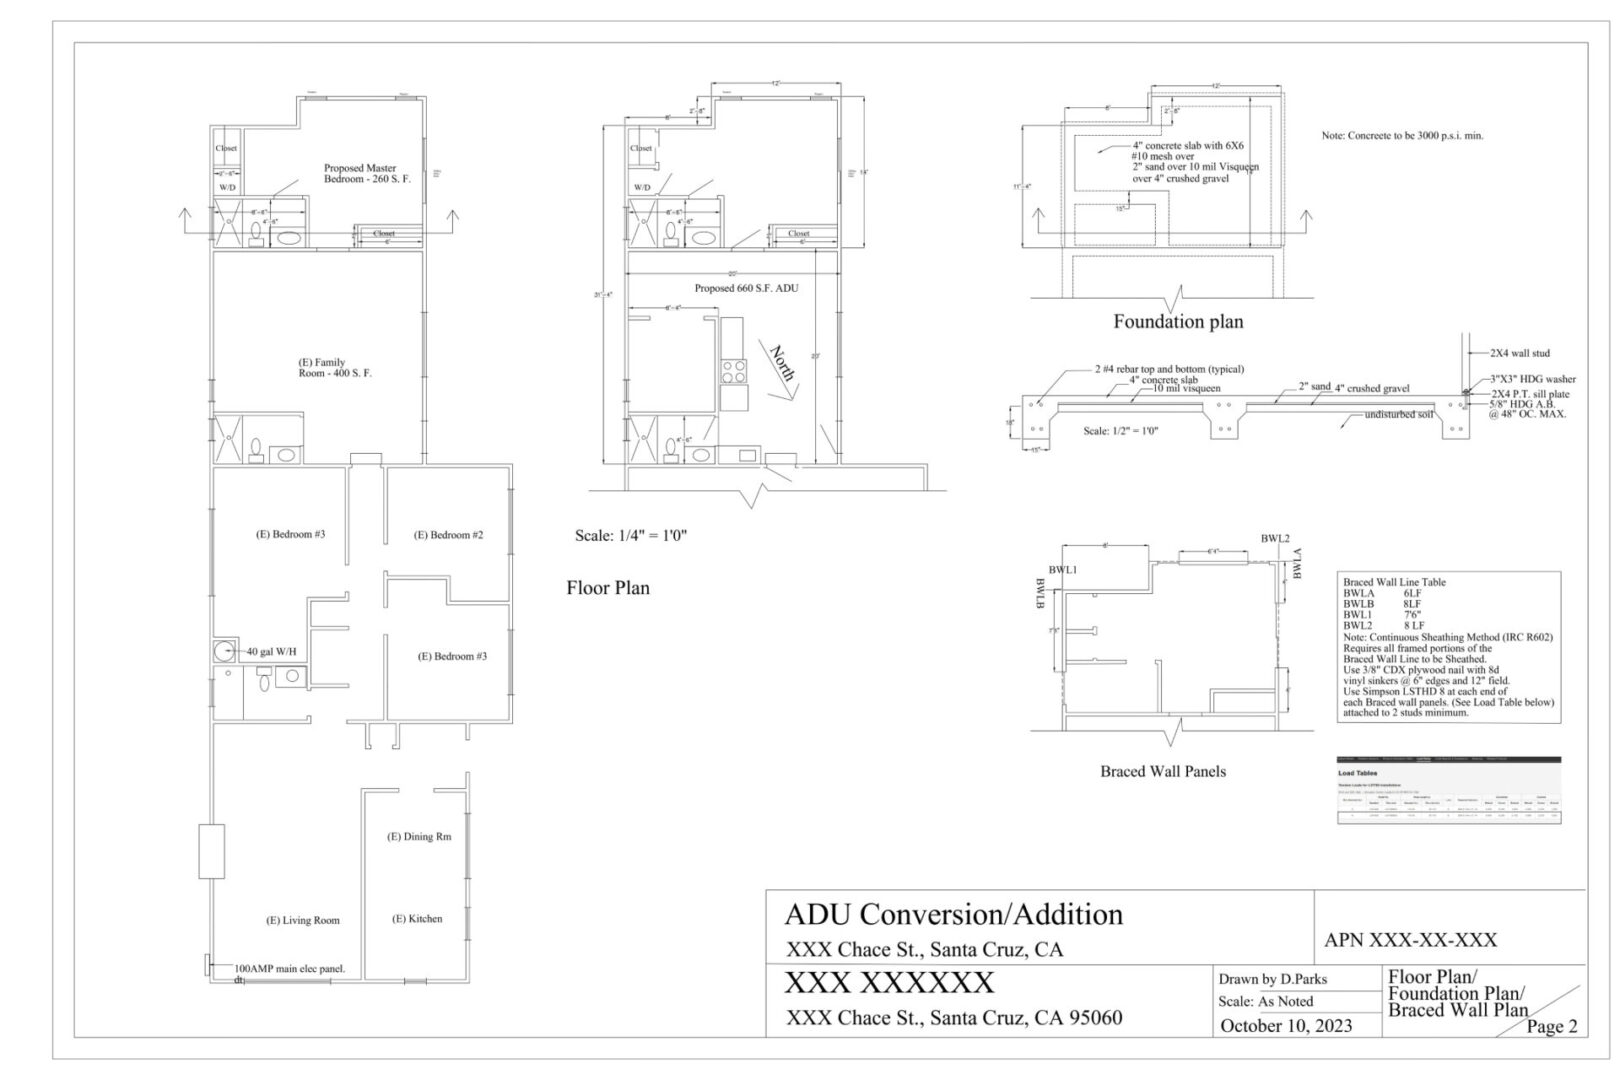 A floor plan of the same size as the house.